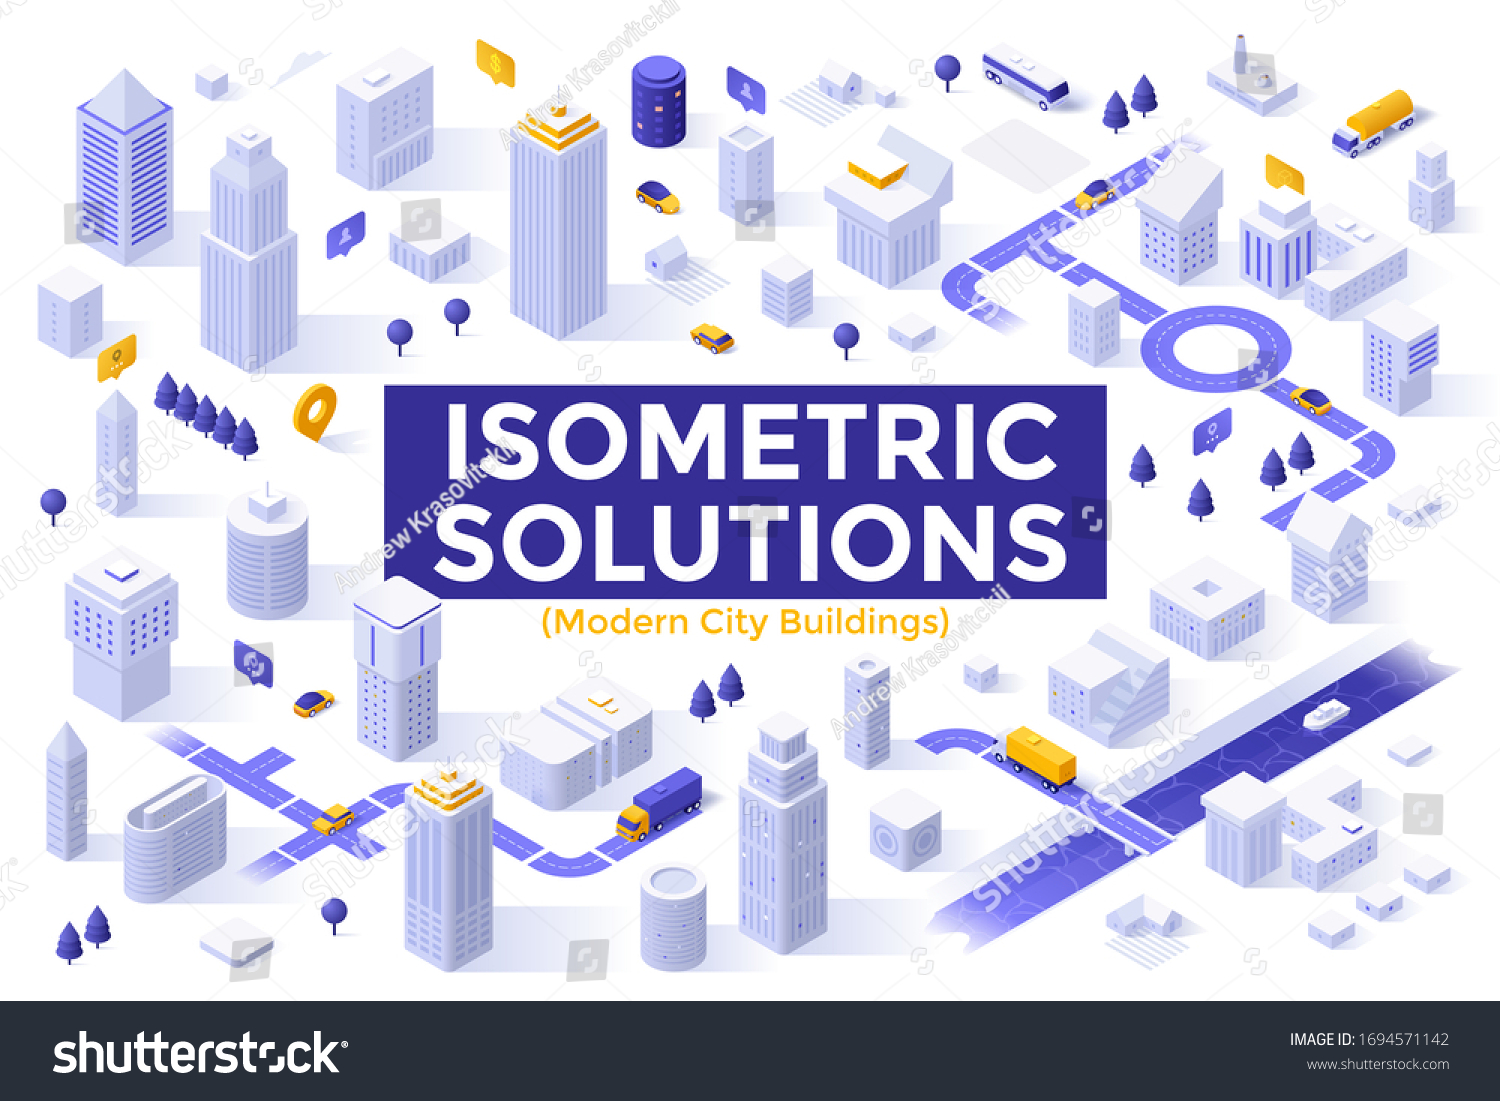 Bundle of megapolis city buildings, downtown skyscrapers, suburban houses. Set of isometric design elements or objects isolated on white background. Modern vector illustration for map construction. #1694571142